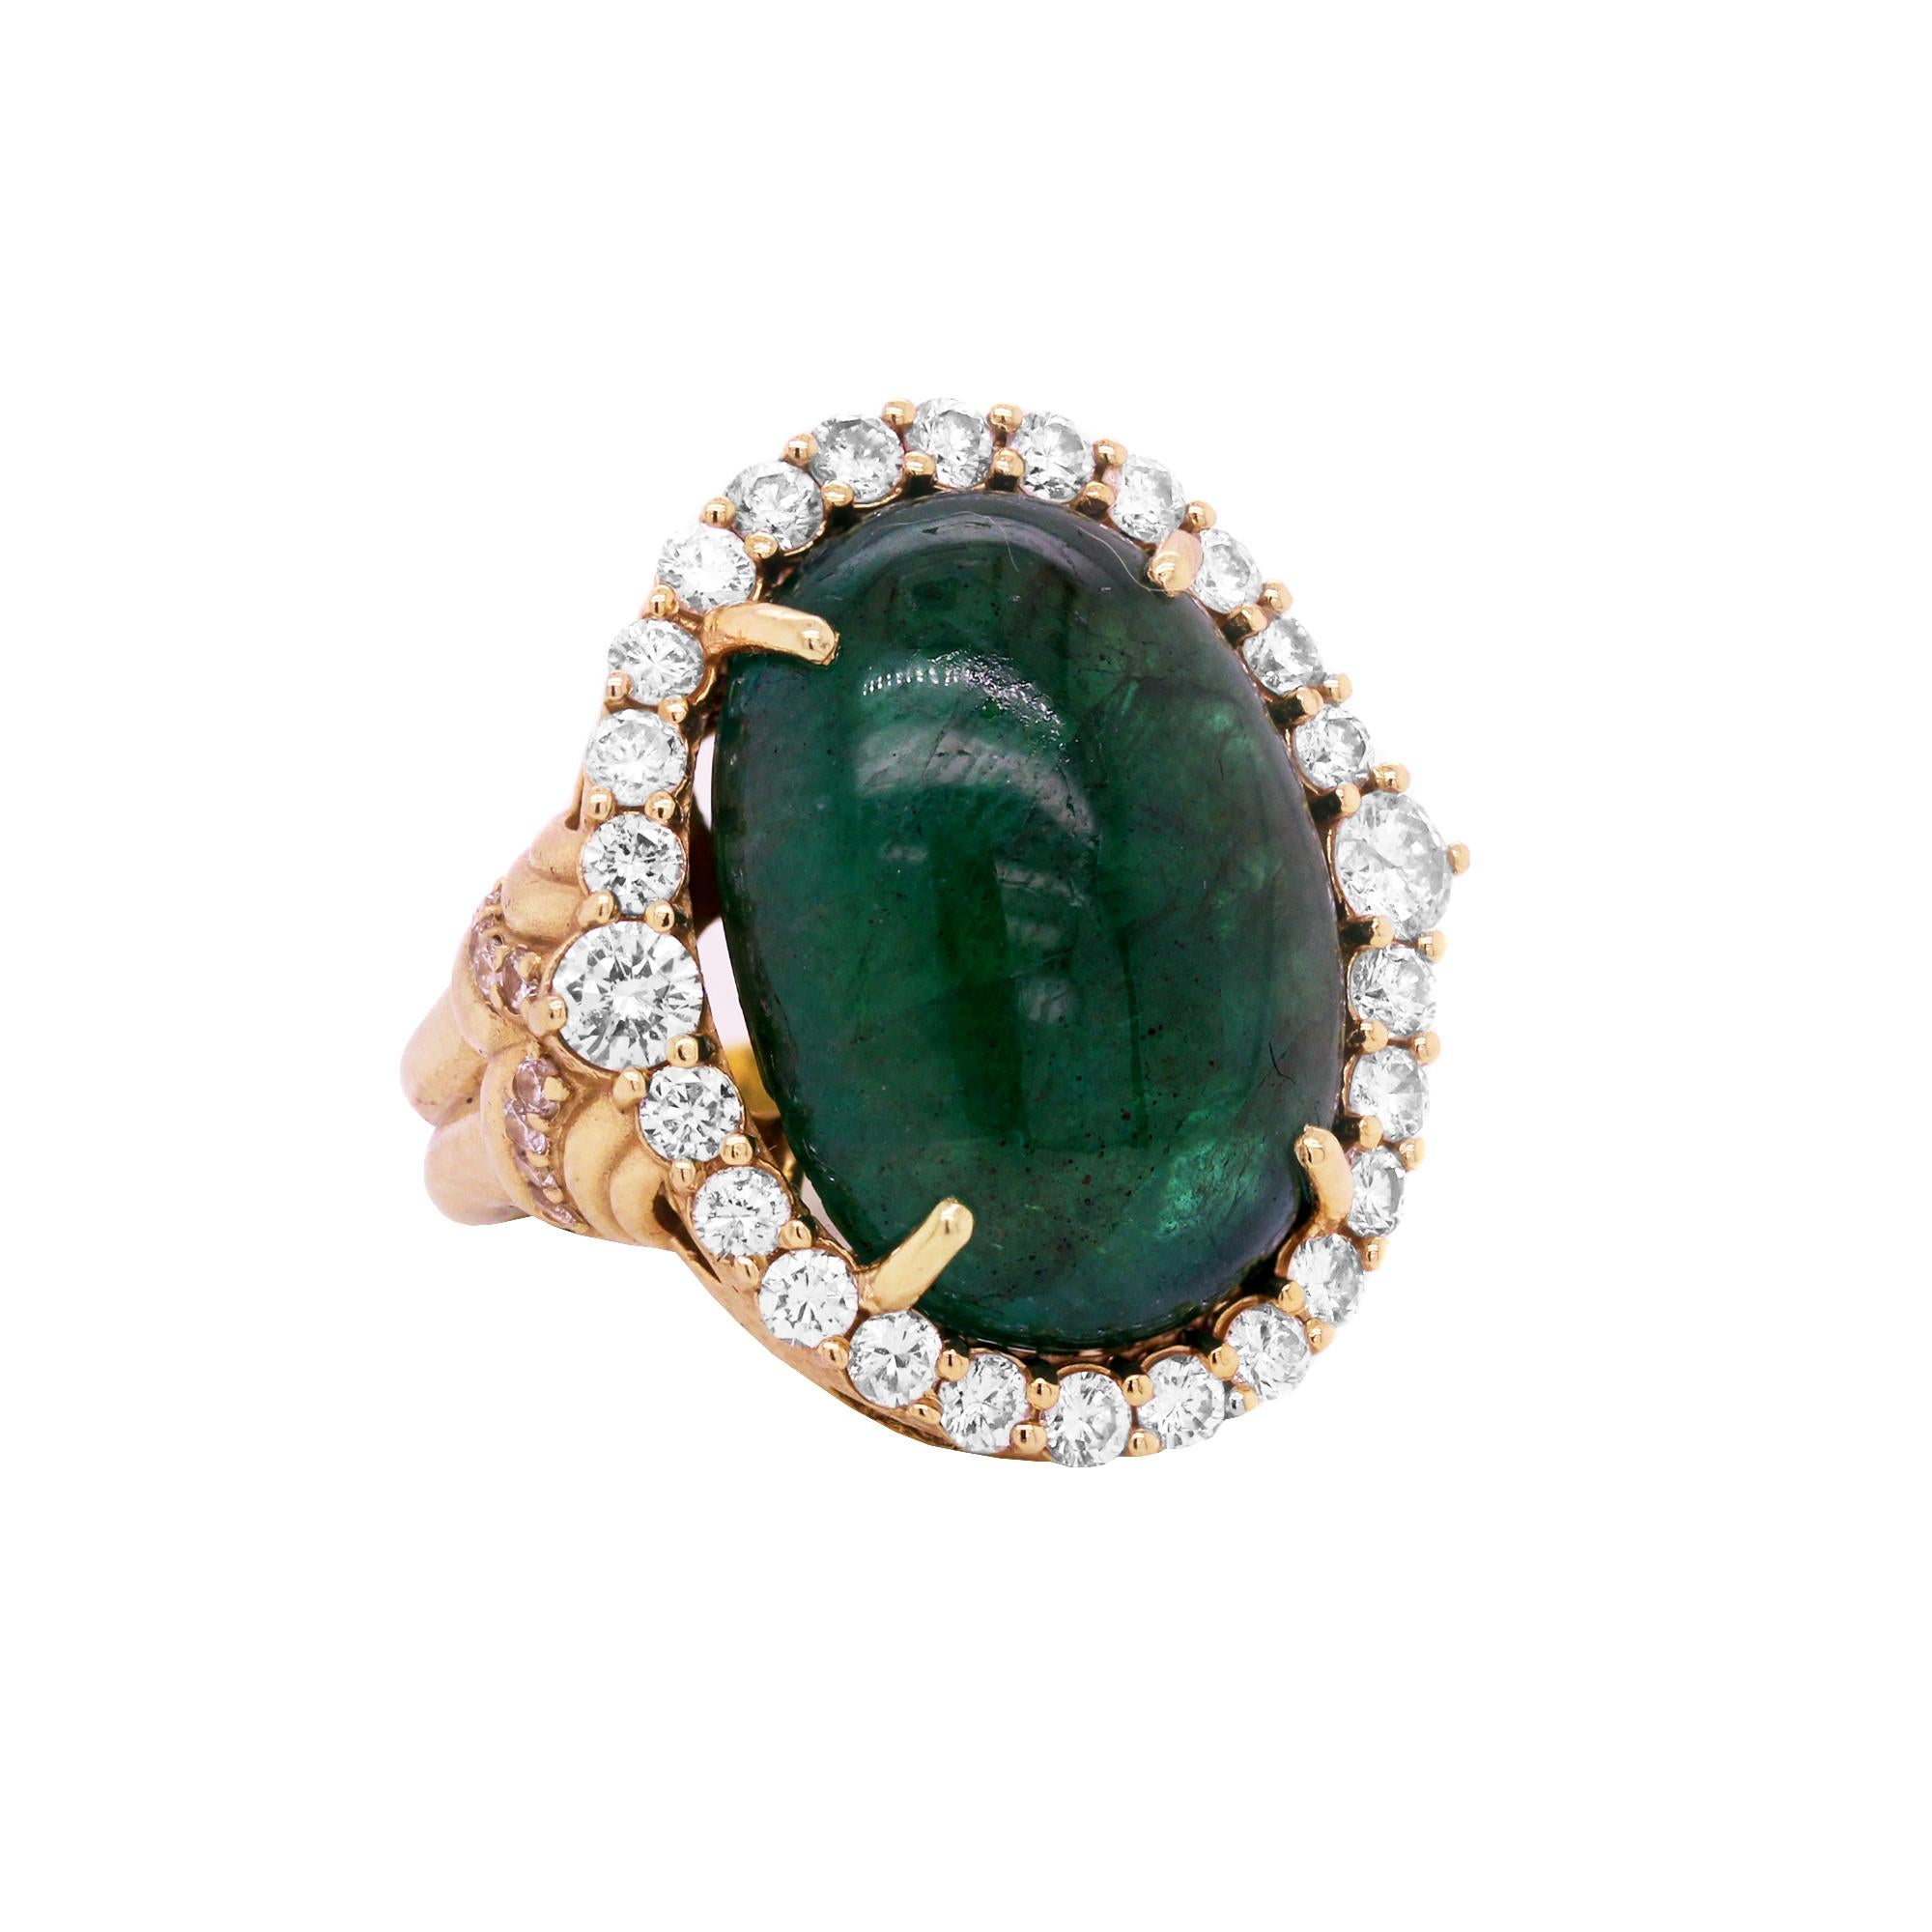 18K Yellow Gold and Diamond Ring with Cabochon cut Colombian Emerald Center

Incredible Emerald with exceptional color. Oval cabochon cut, apprx. 33 carat total weight

2.50 carat G-F color, VS clarity white diamonds total weight

Ring is entirely